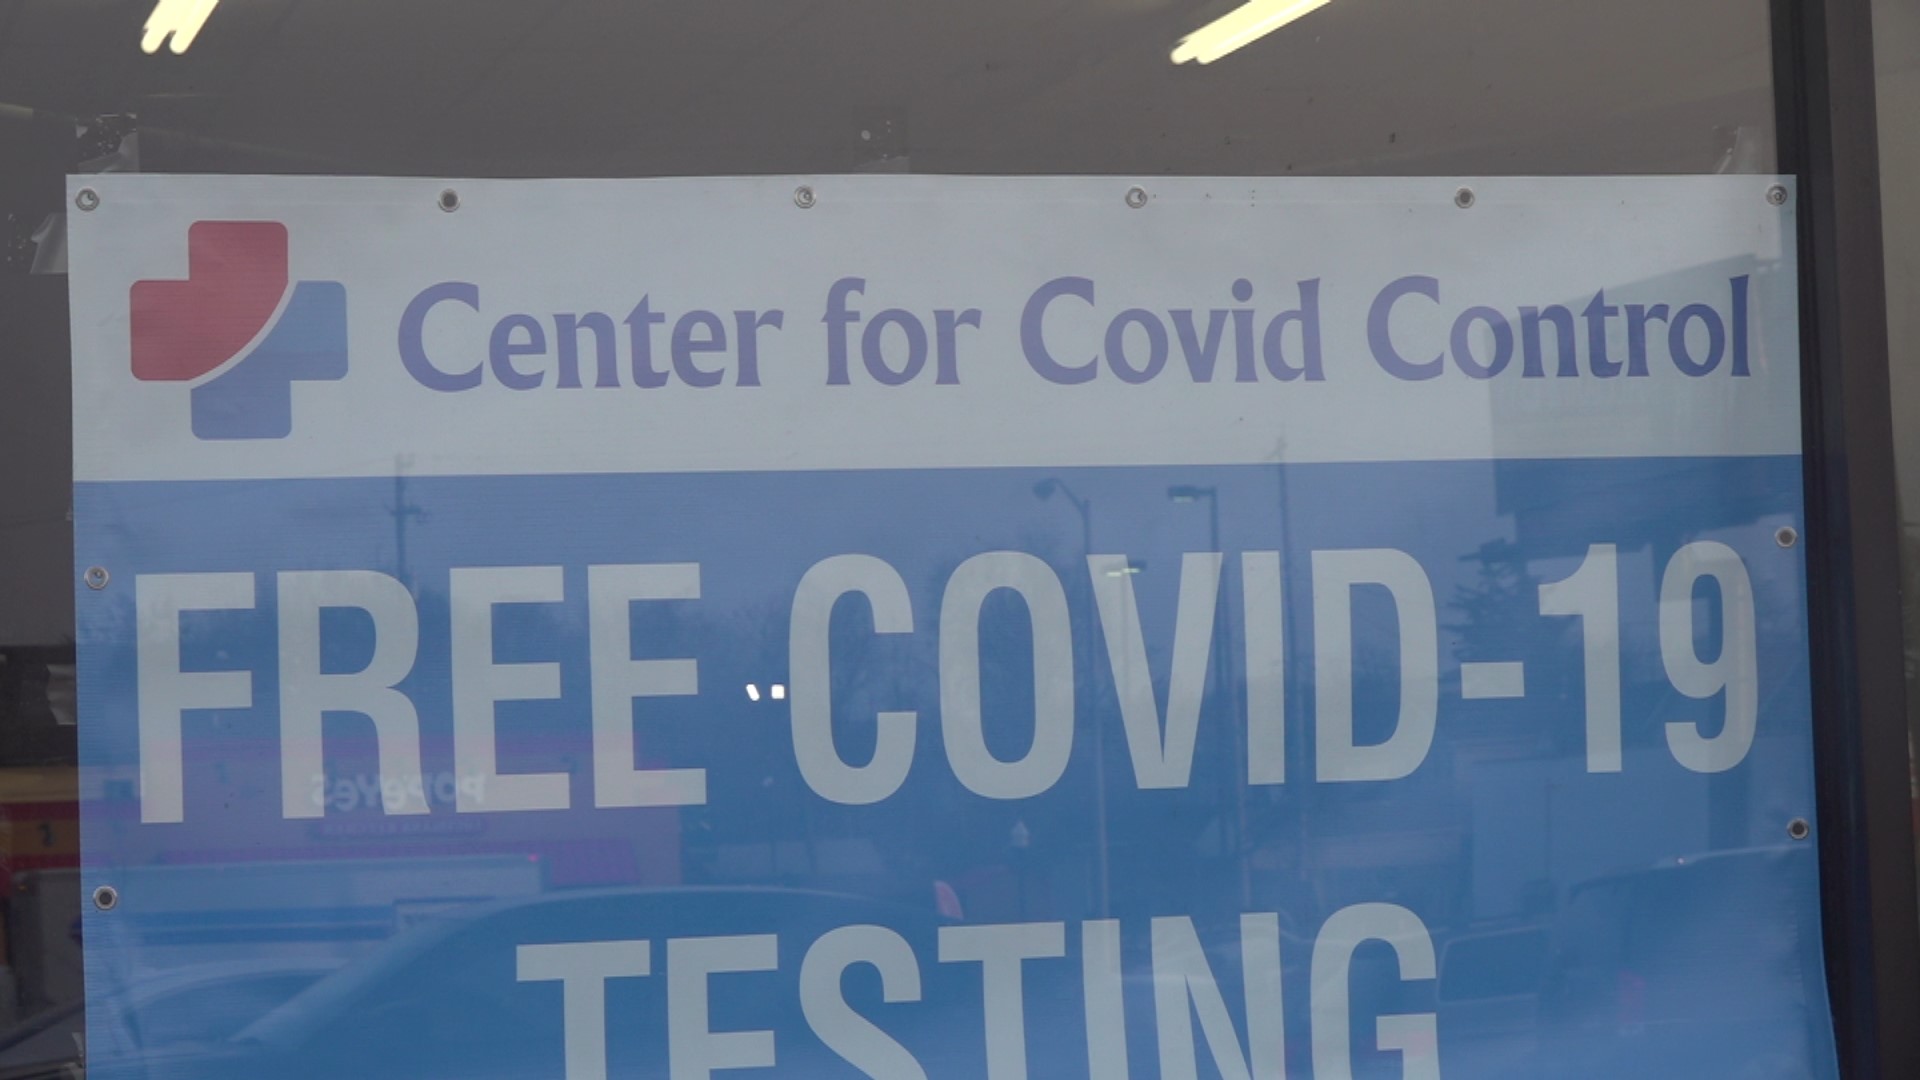 Center for Covid Control has two locations in Columbus and its website says there are more than 300 across the country.